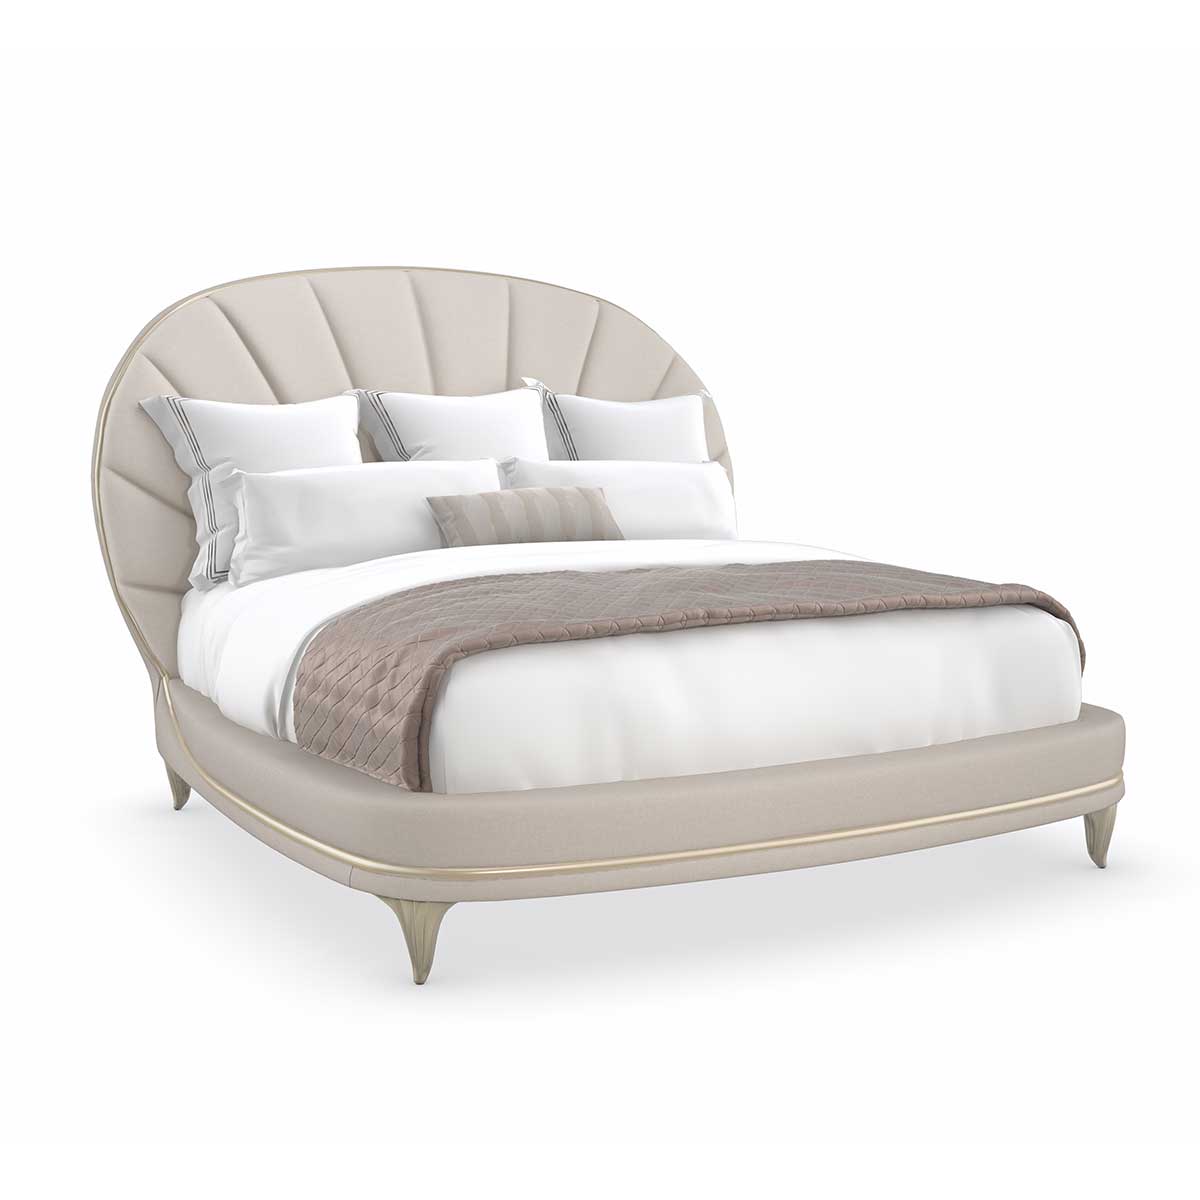 Lillian Clam Shell Bed